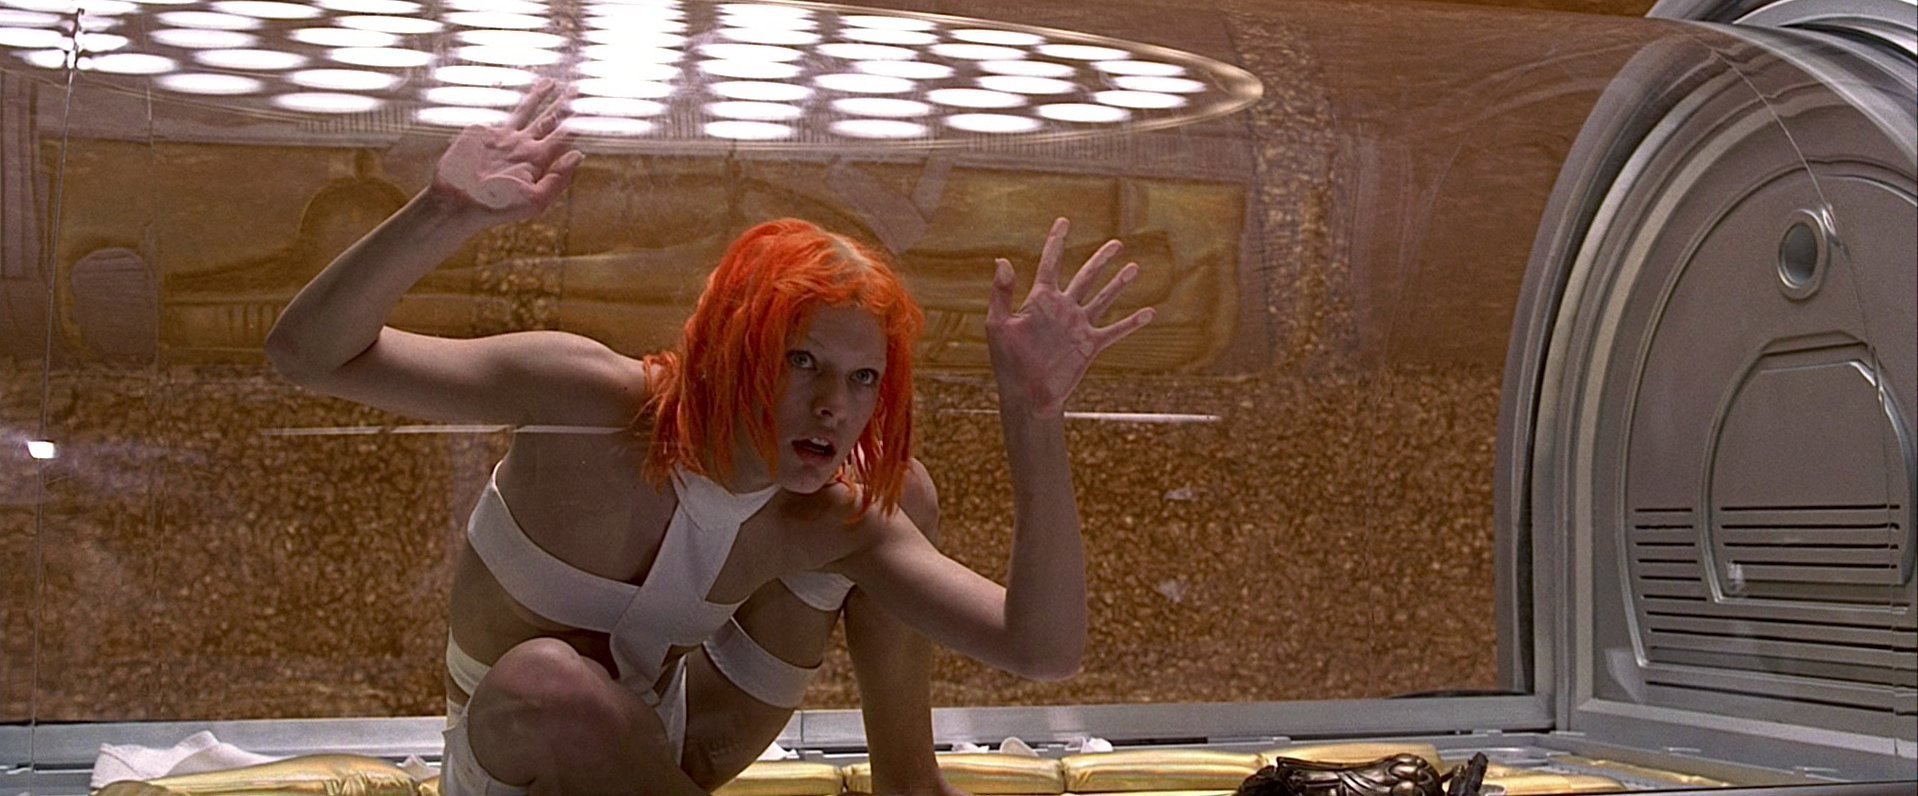 the fifth element, images, image, wallpaper, photos, photo, photograph, gal...